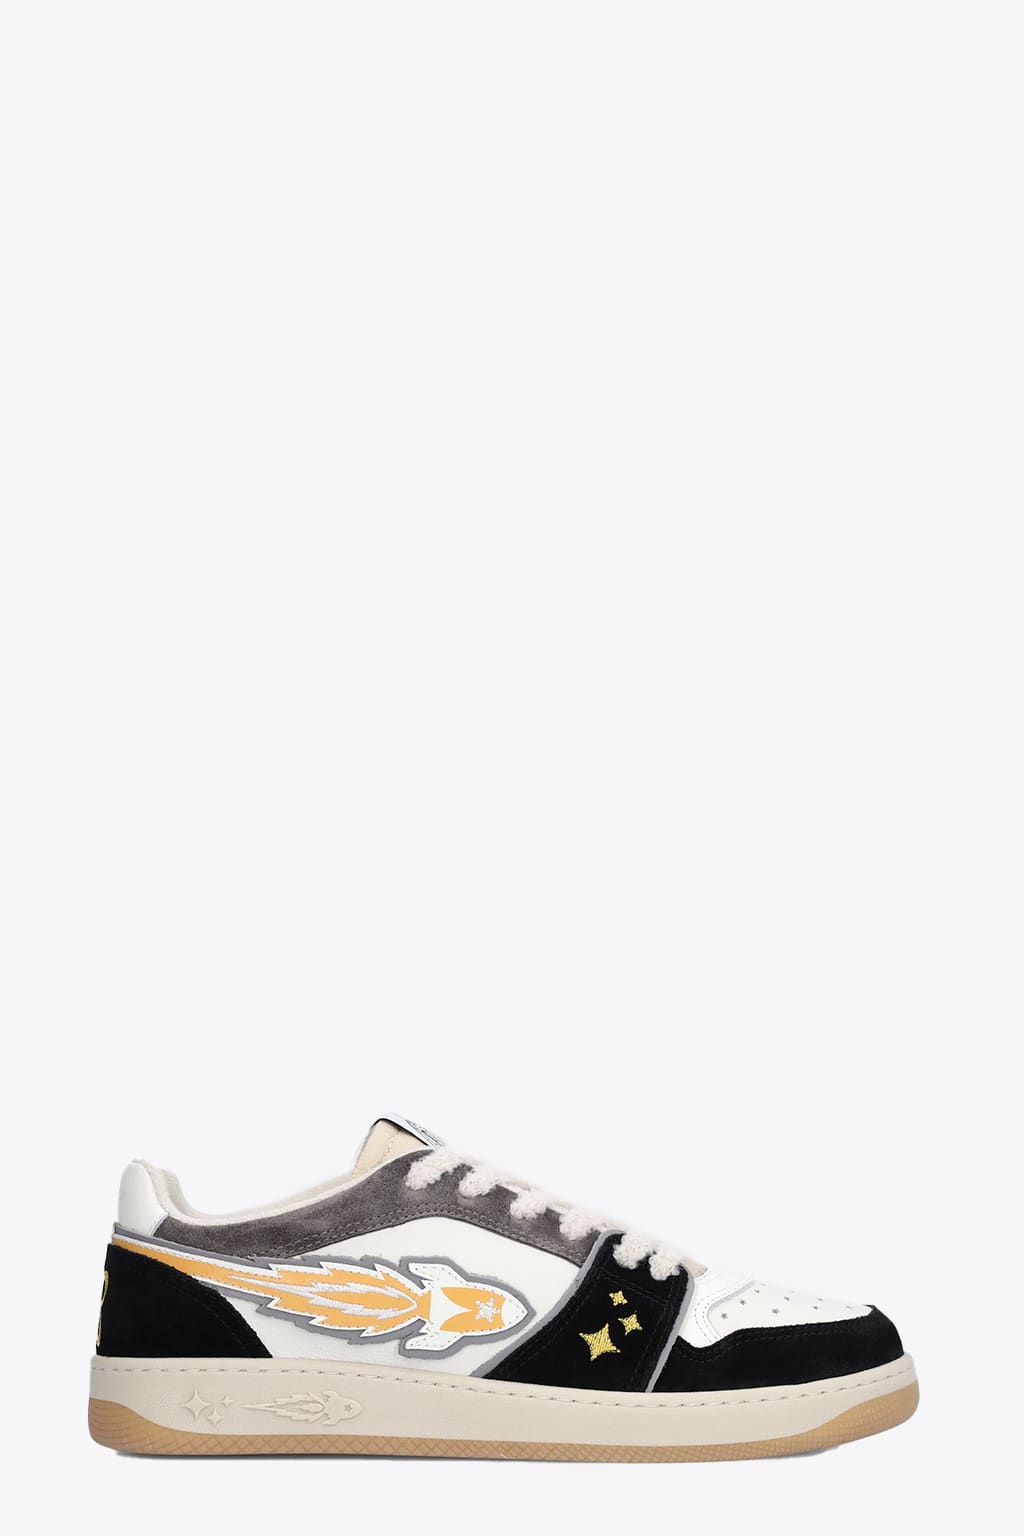 Enterprise Japan Rocket Low Off-white leather and black suede low sneakers with side rocket